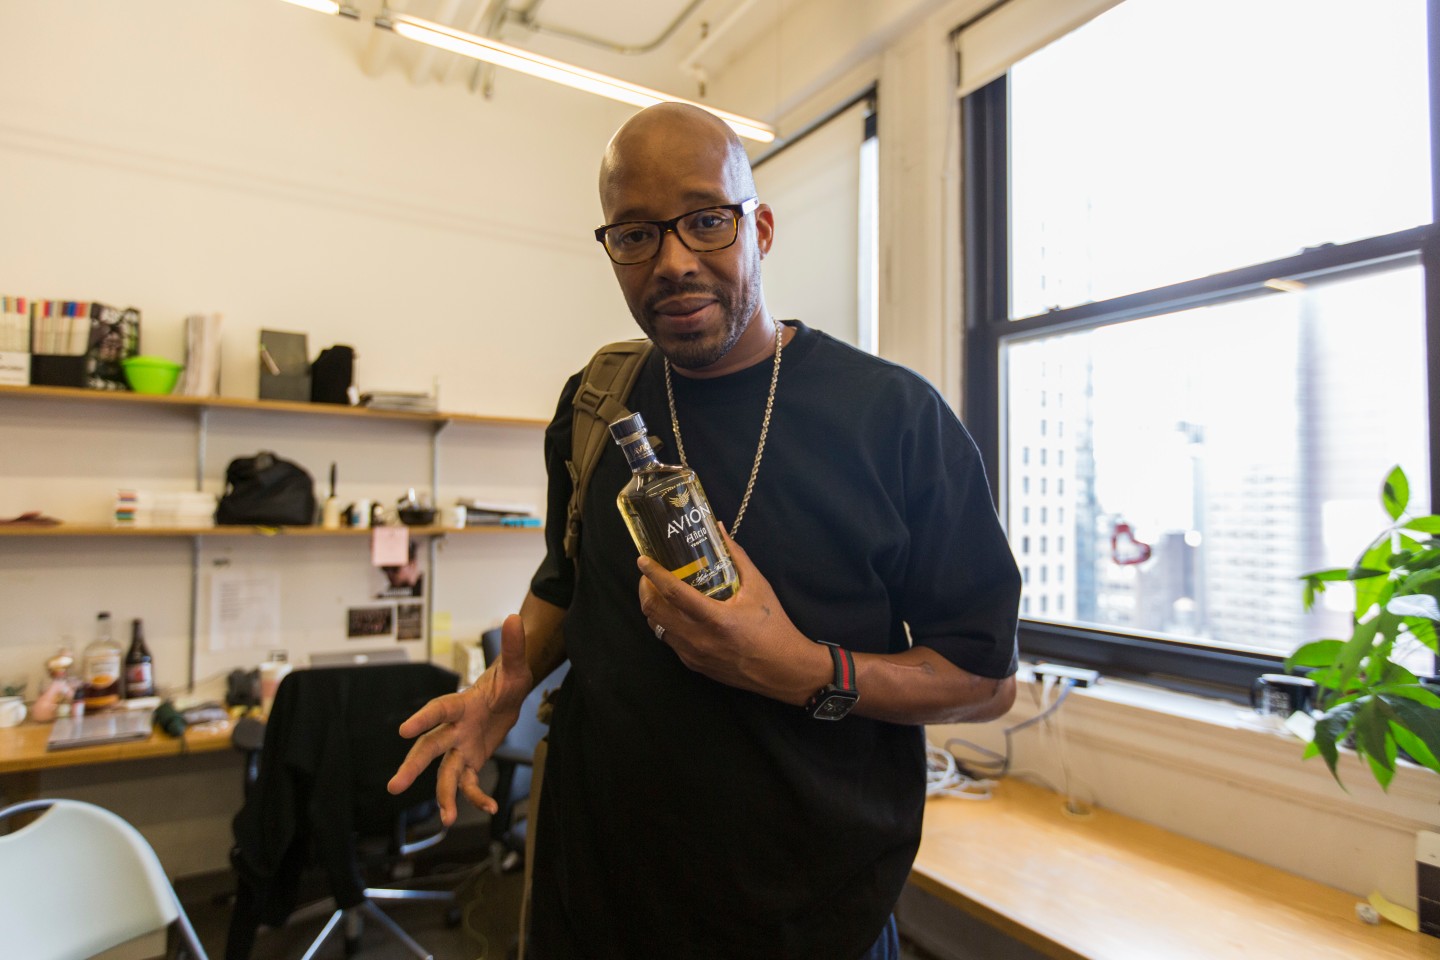 The Things I Carry: Warren G